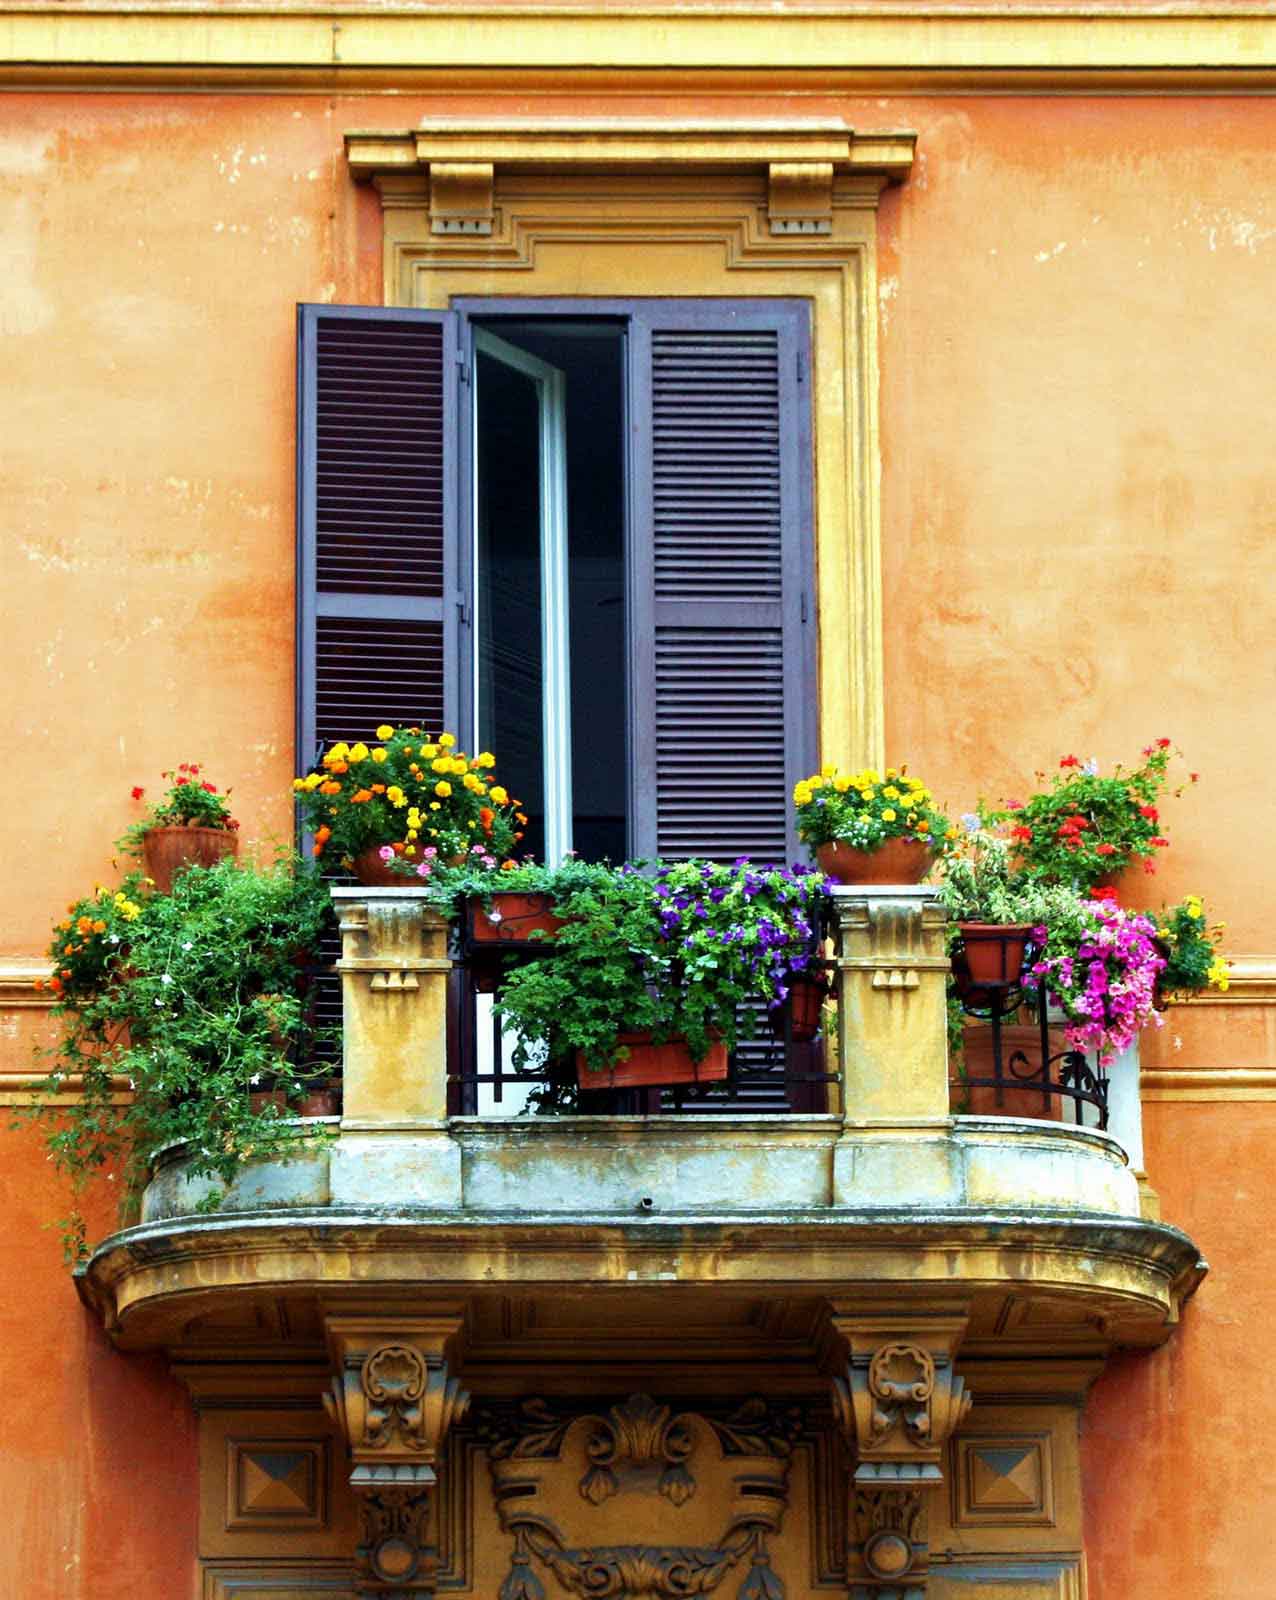 35 World's Most Beautiful Balconies - Your No.1 source of ...